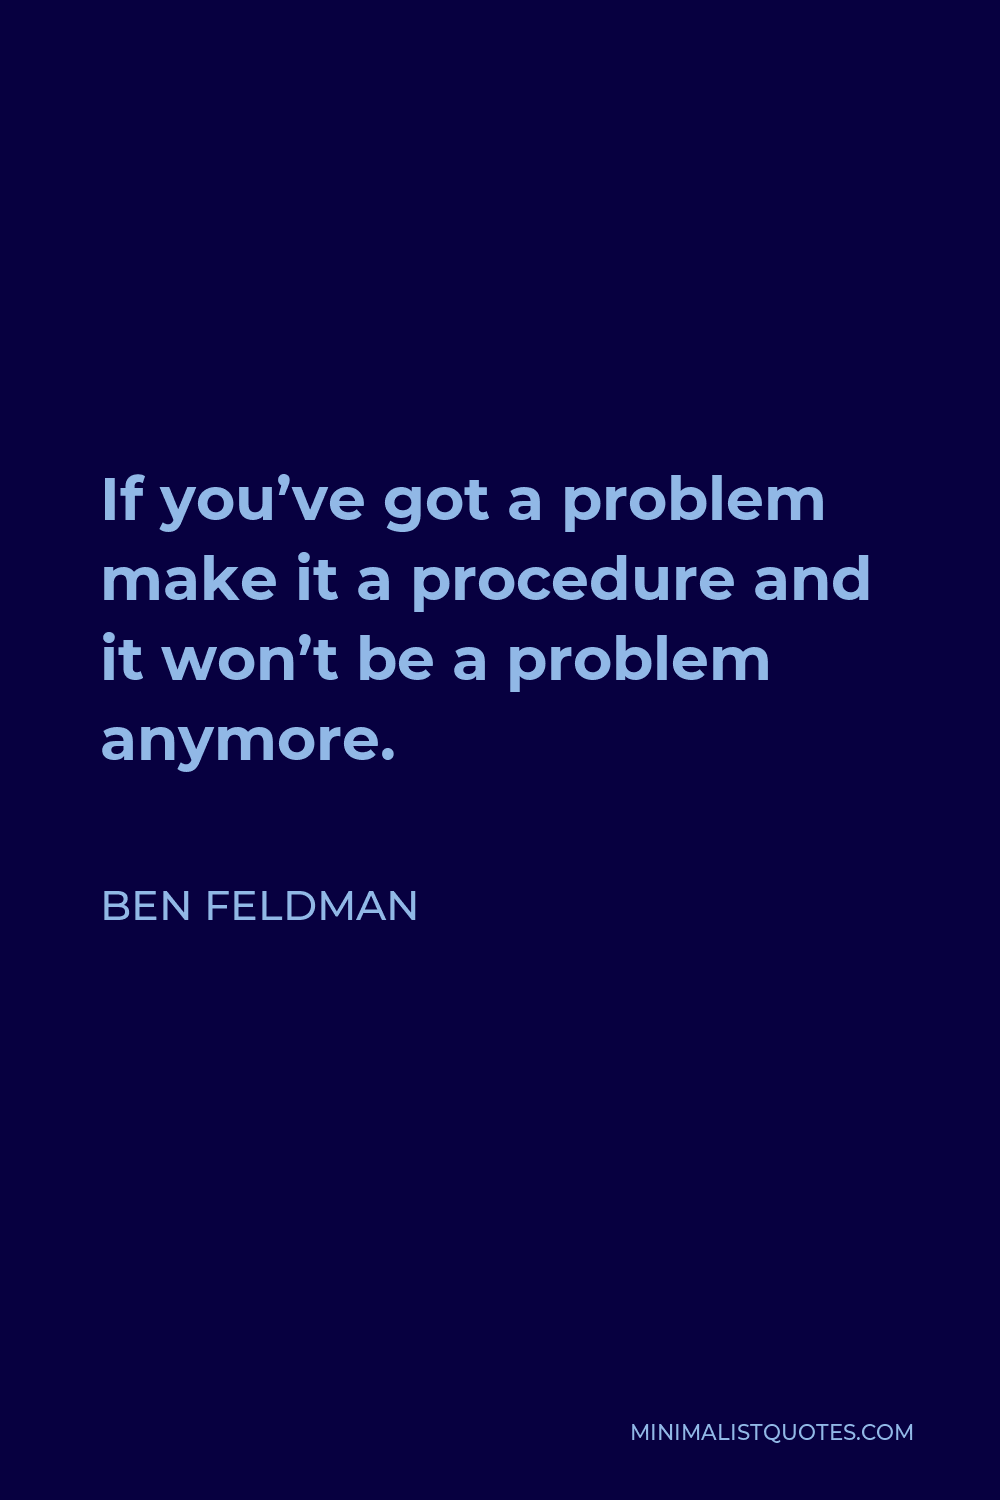 Ben Feldman Quote - If you’ve got a problem make it a procedure and it won’t be a problem anymore.